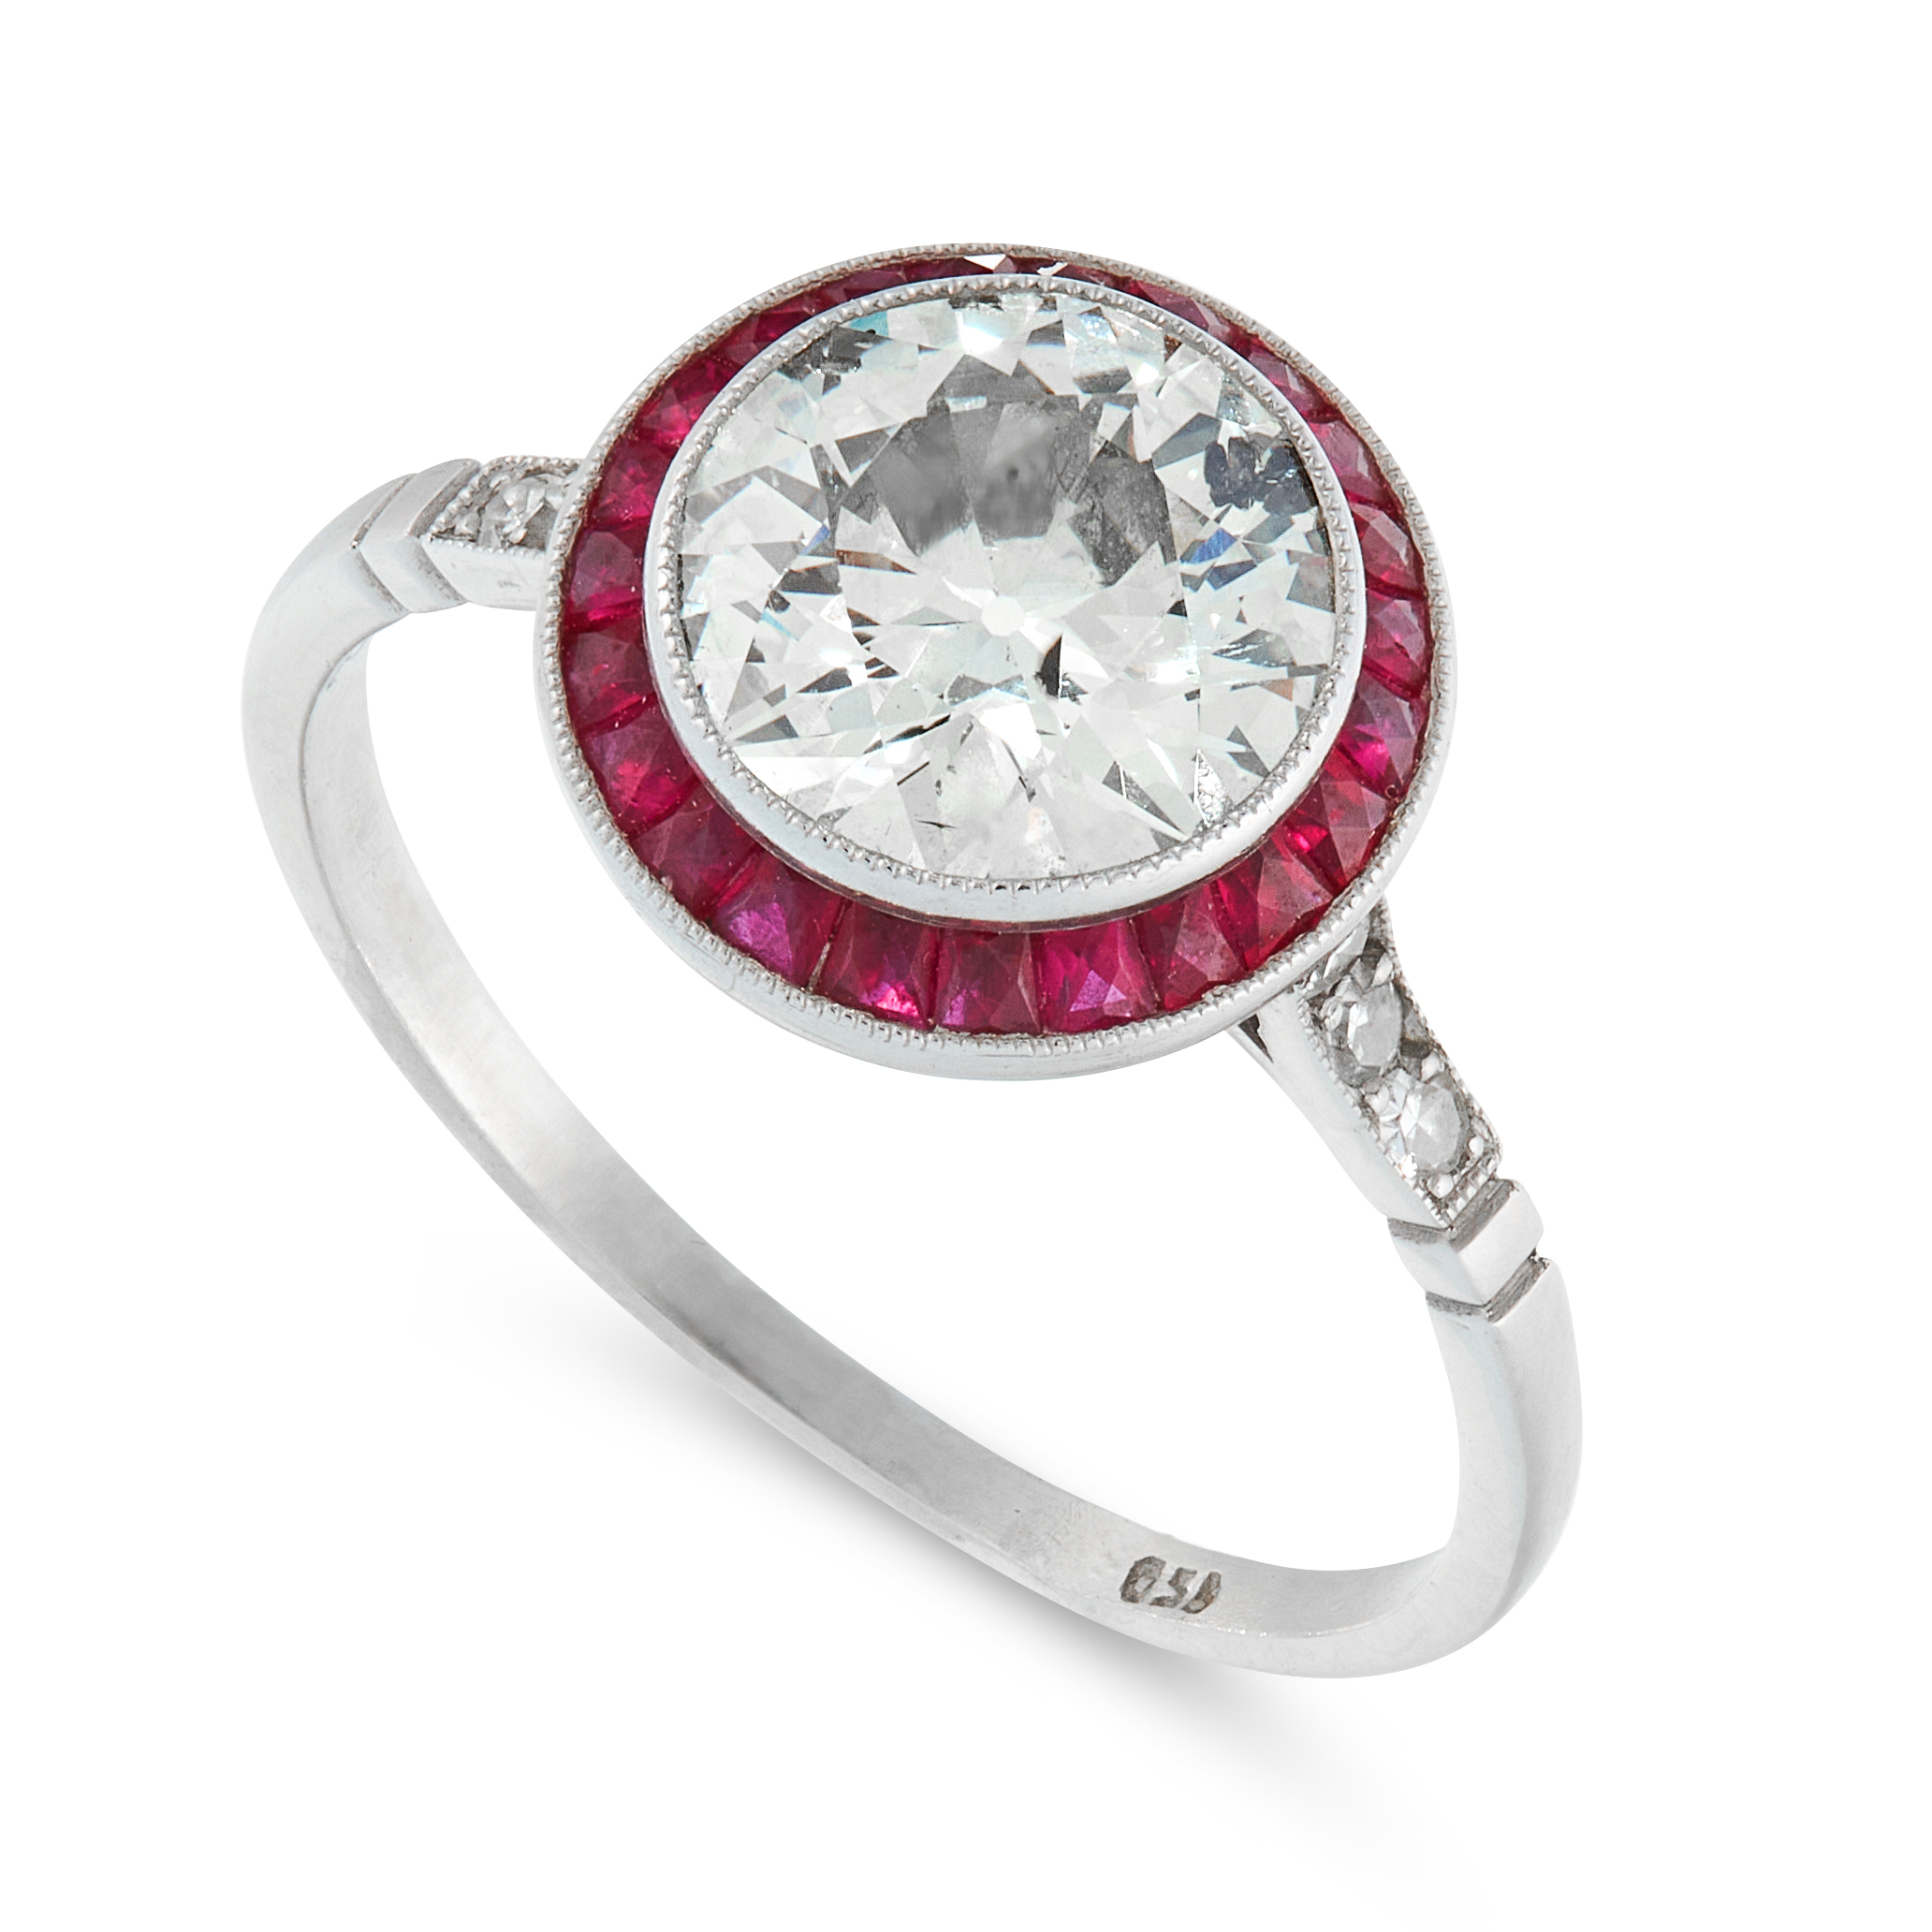 A DIAMOND AND RUBY TARGET RING in Art Deco design, in platinum, set with a central old European